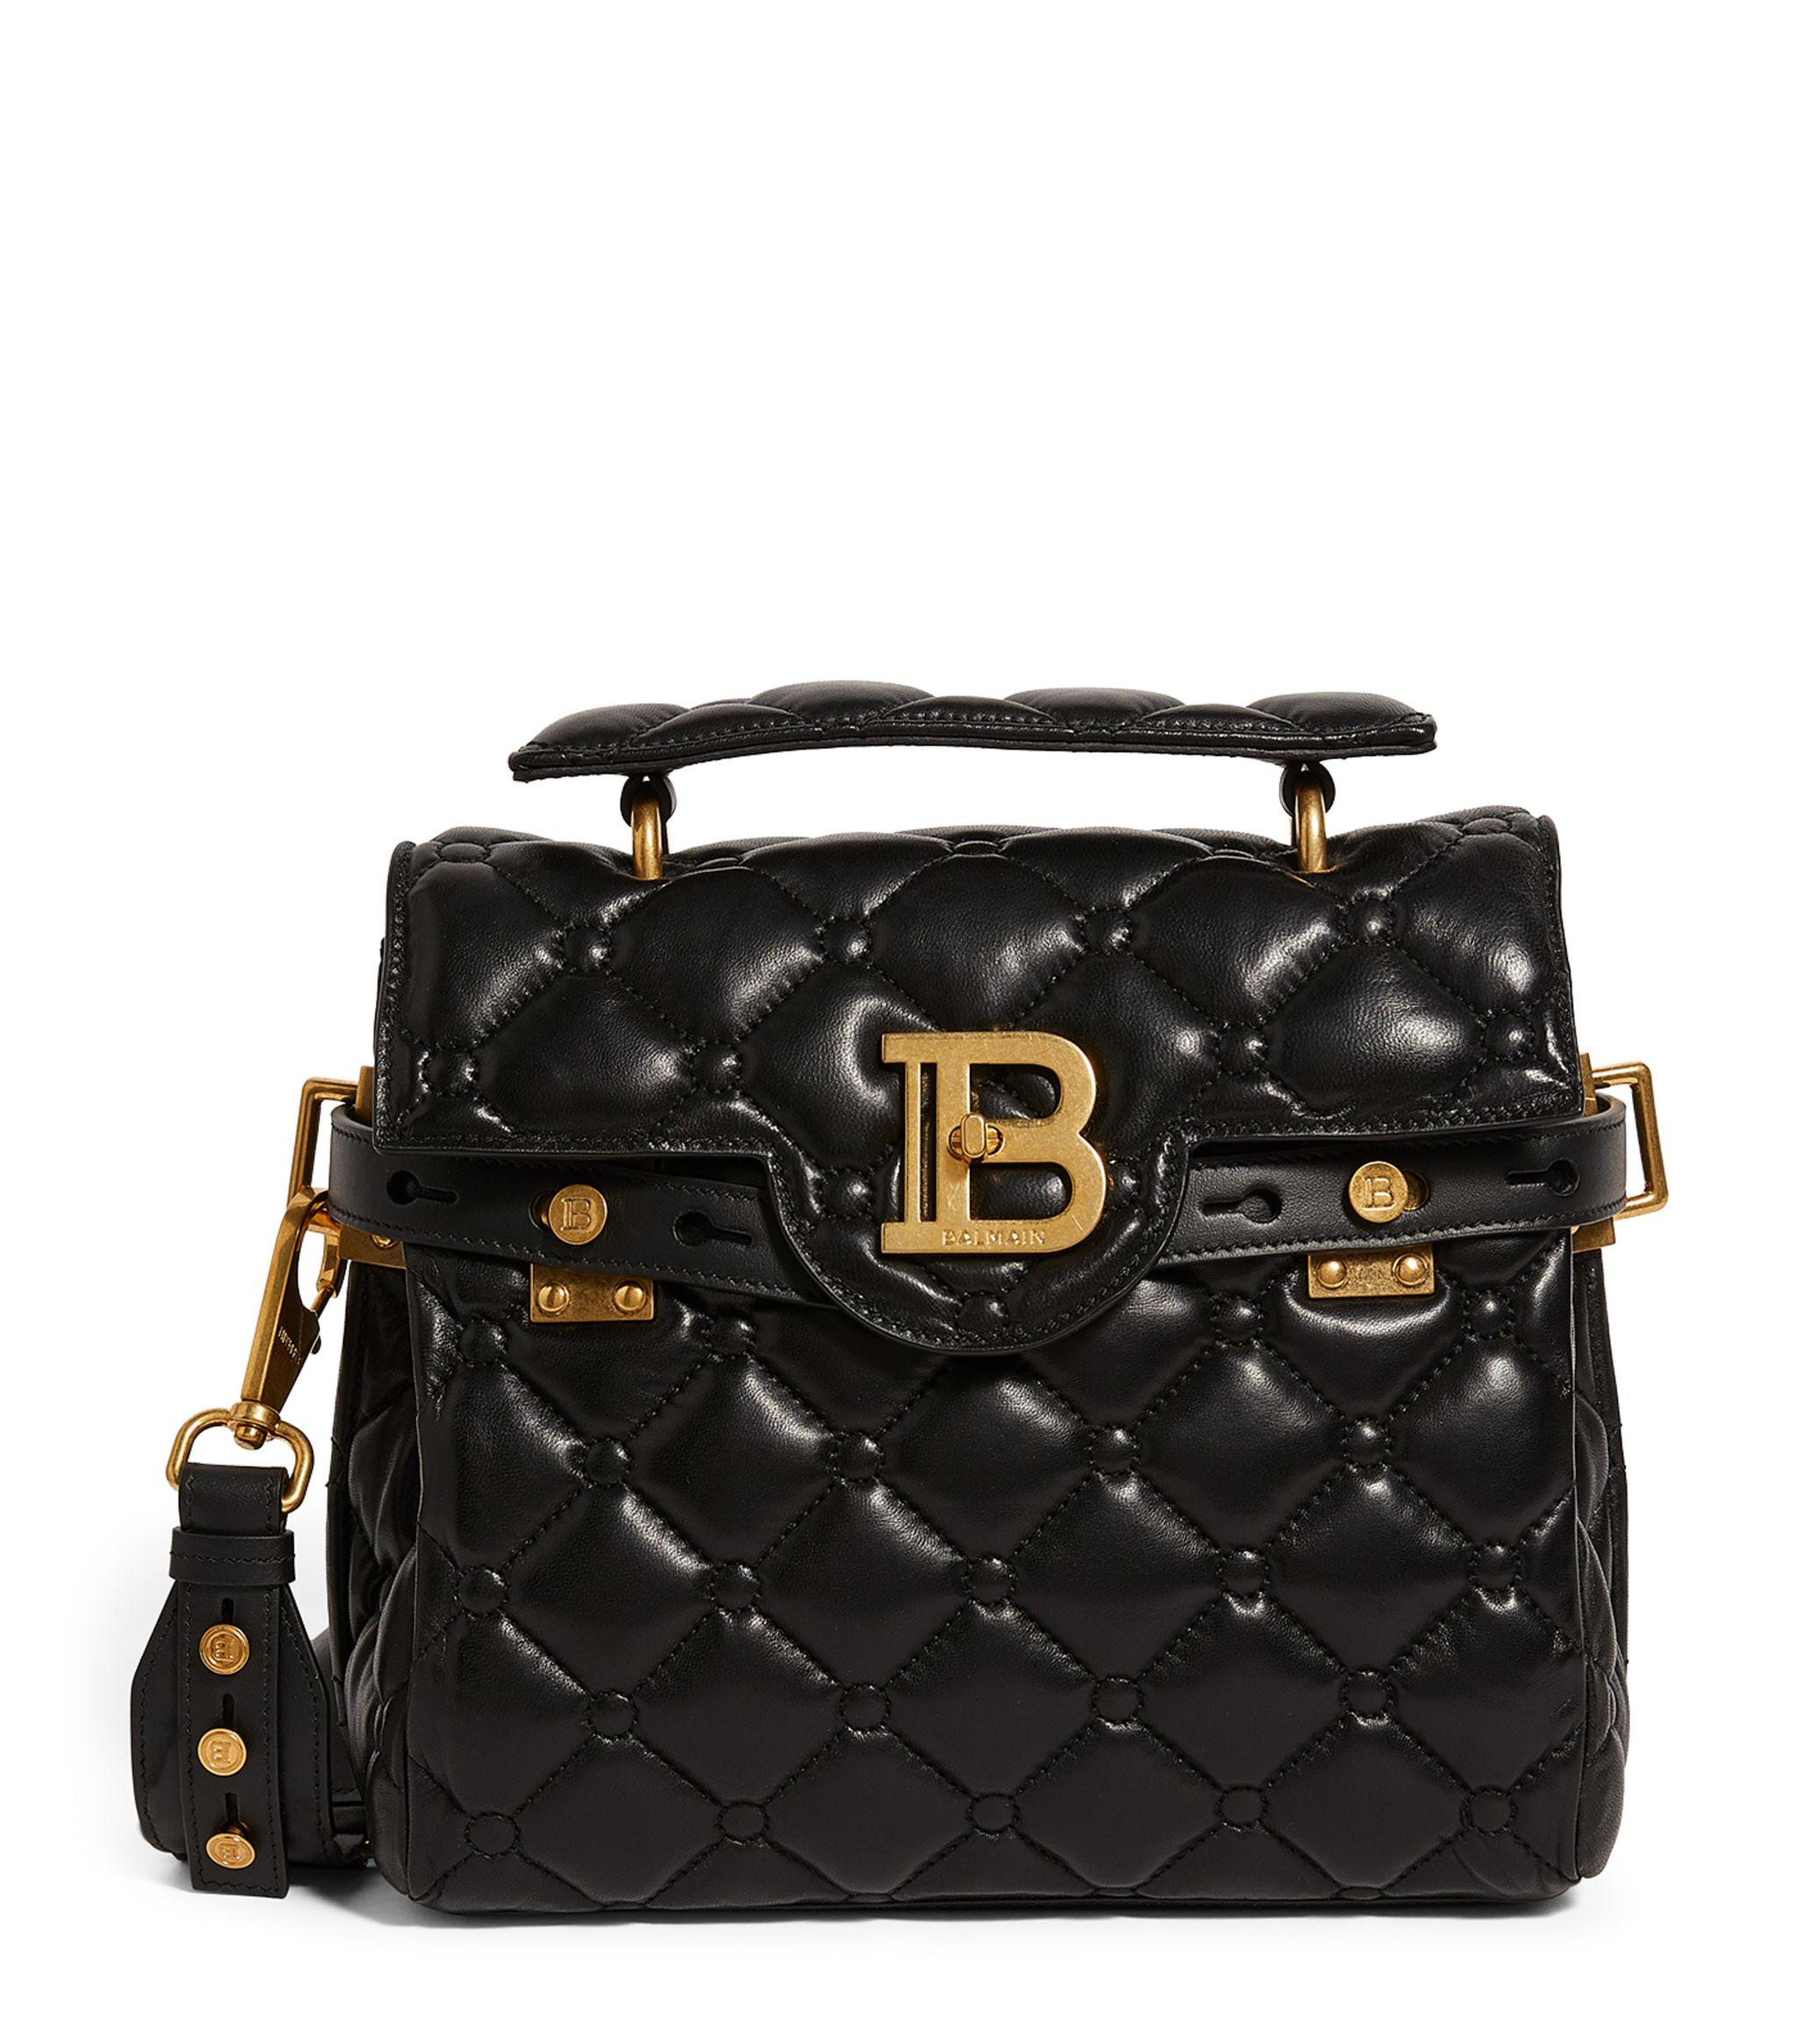 Balmain Leather B-buzz 23 Quilted Shoulder Bag in Black - Lyst